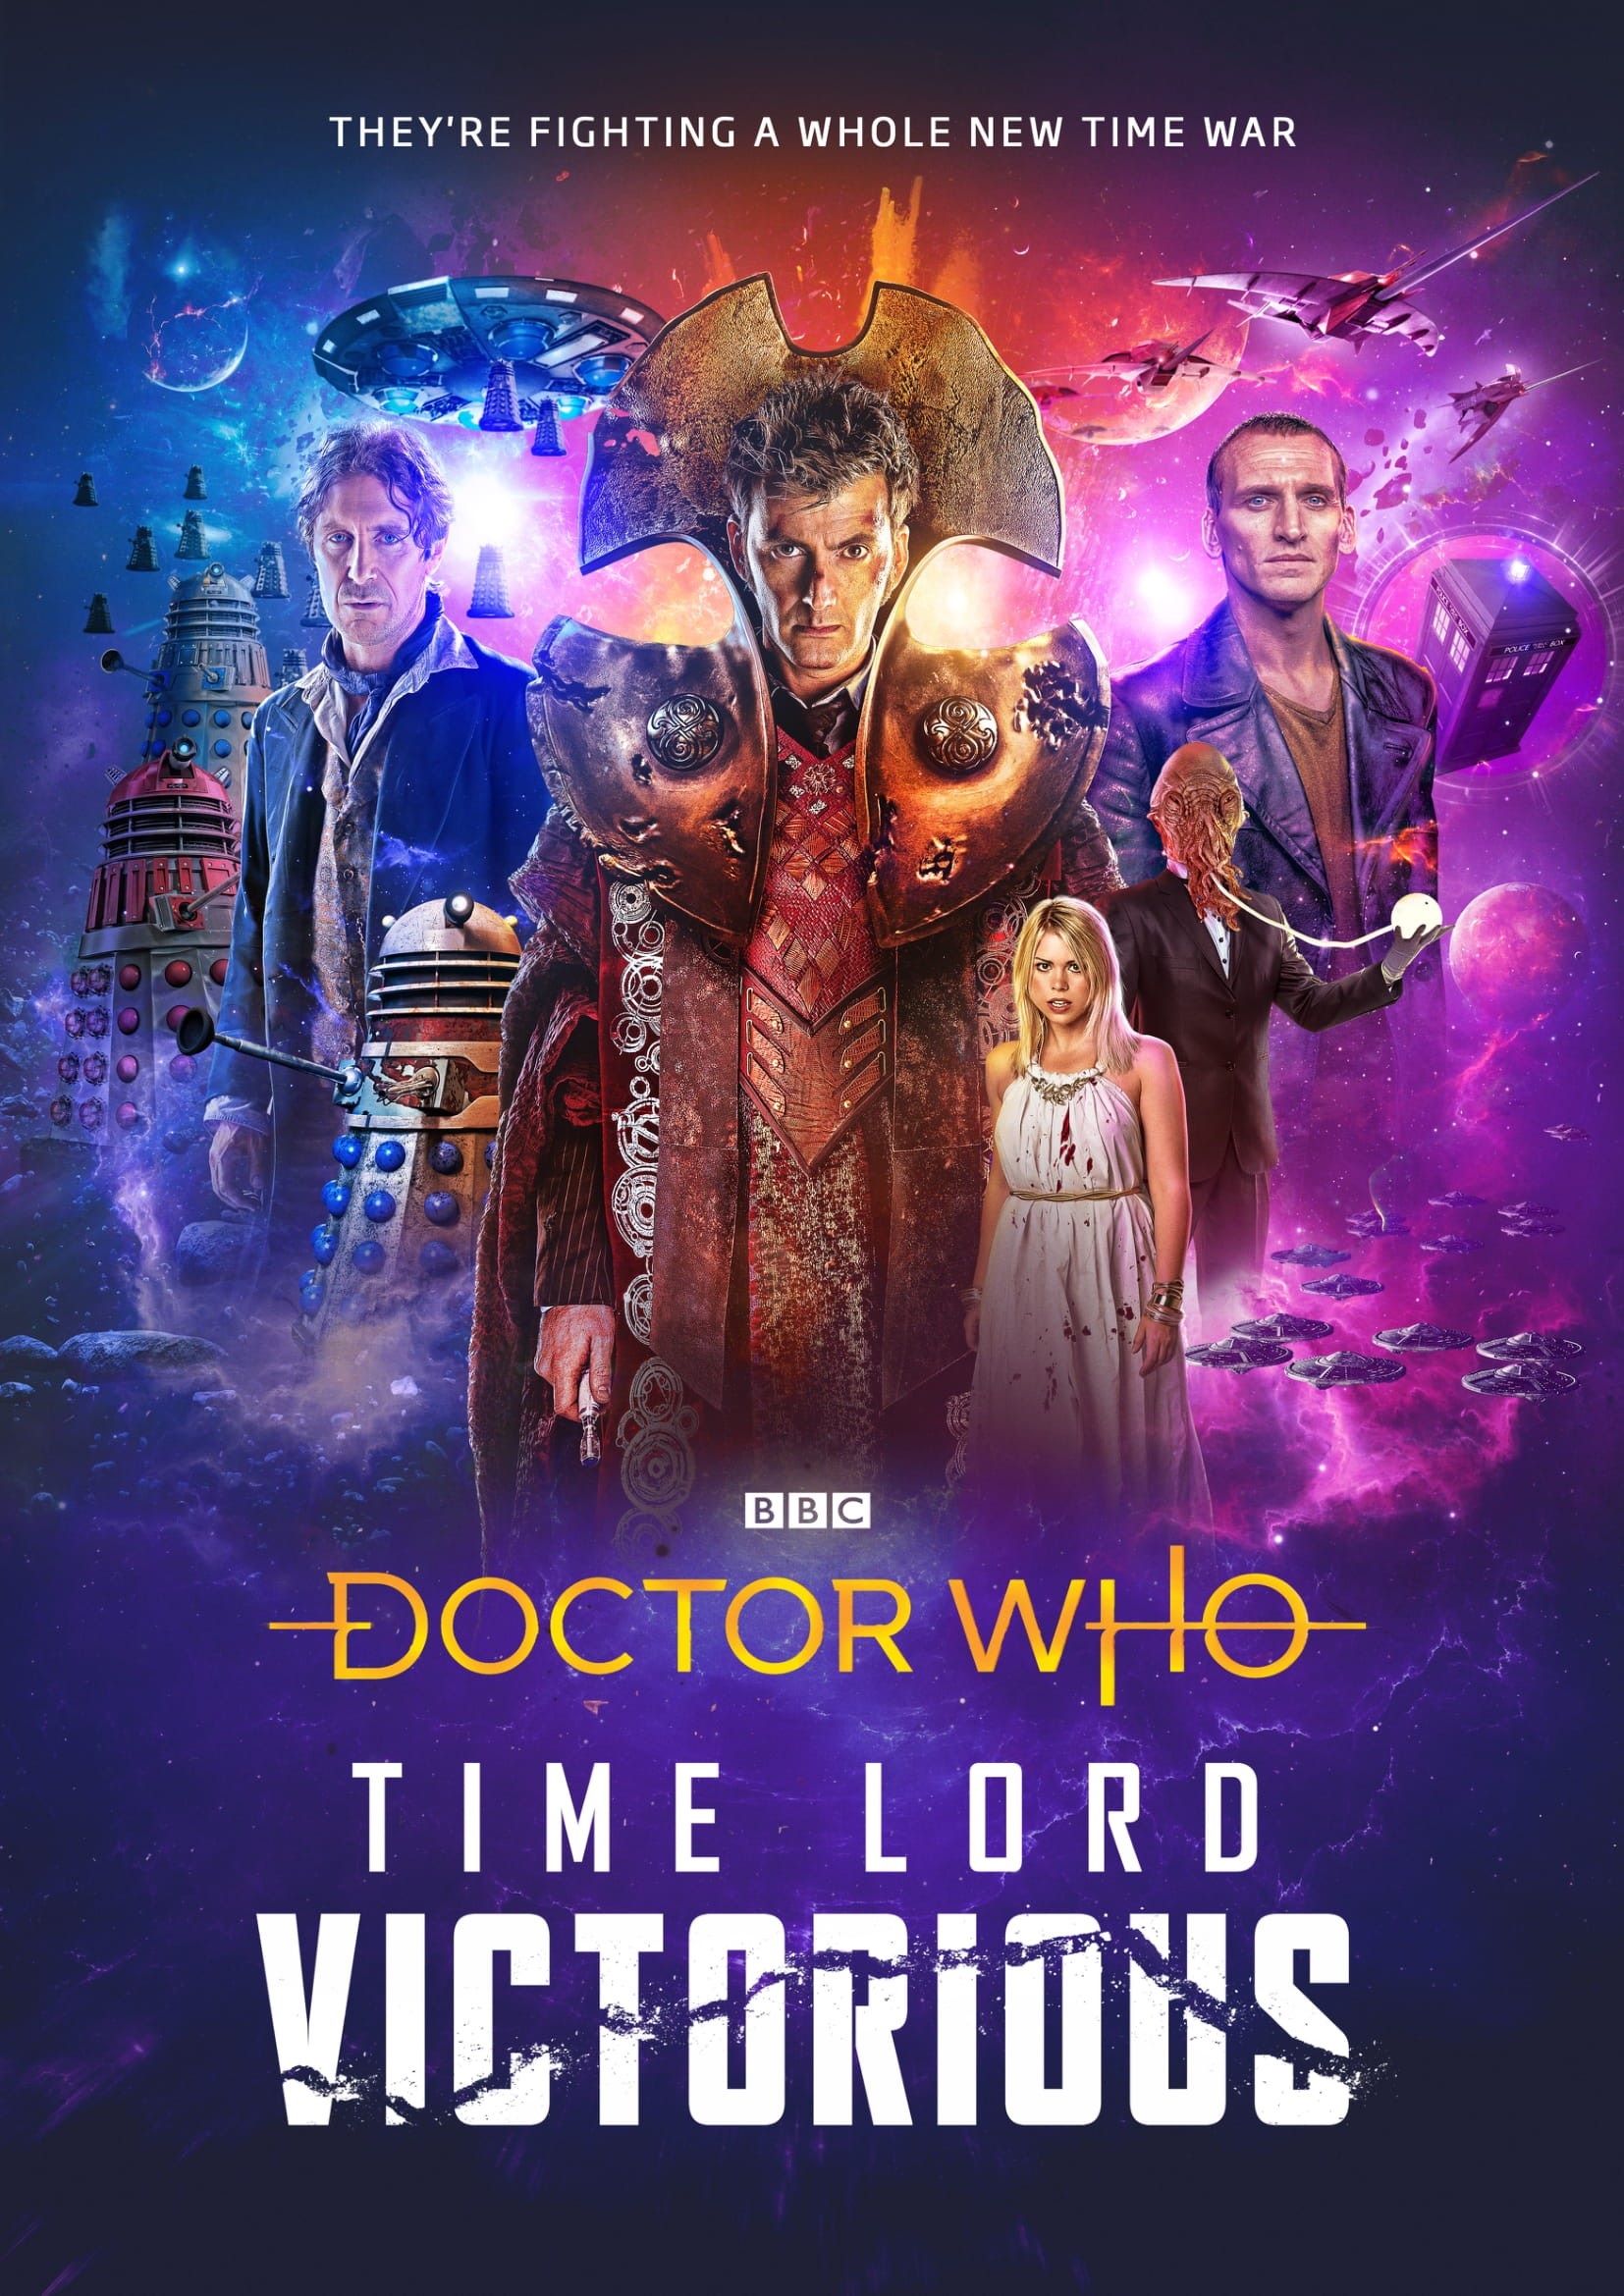 Time-Lord-Victorious.jpg